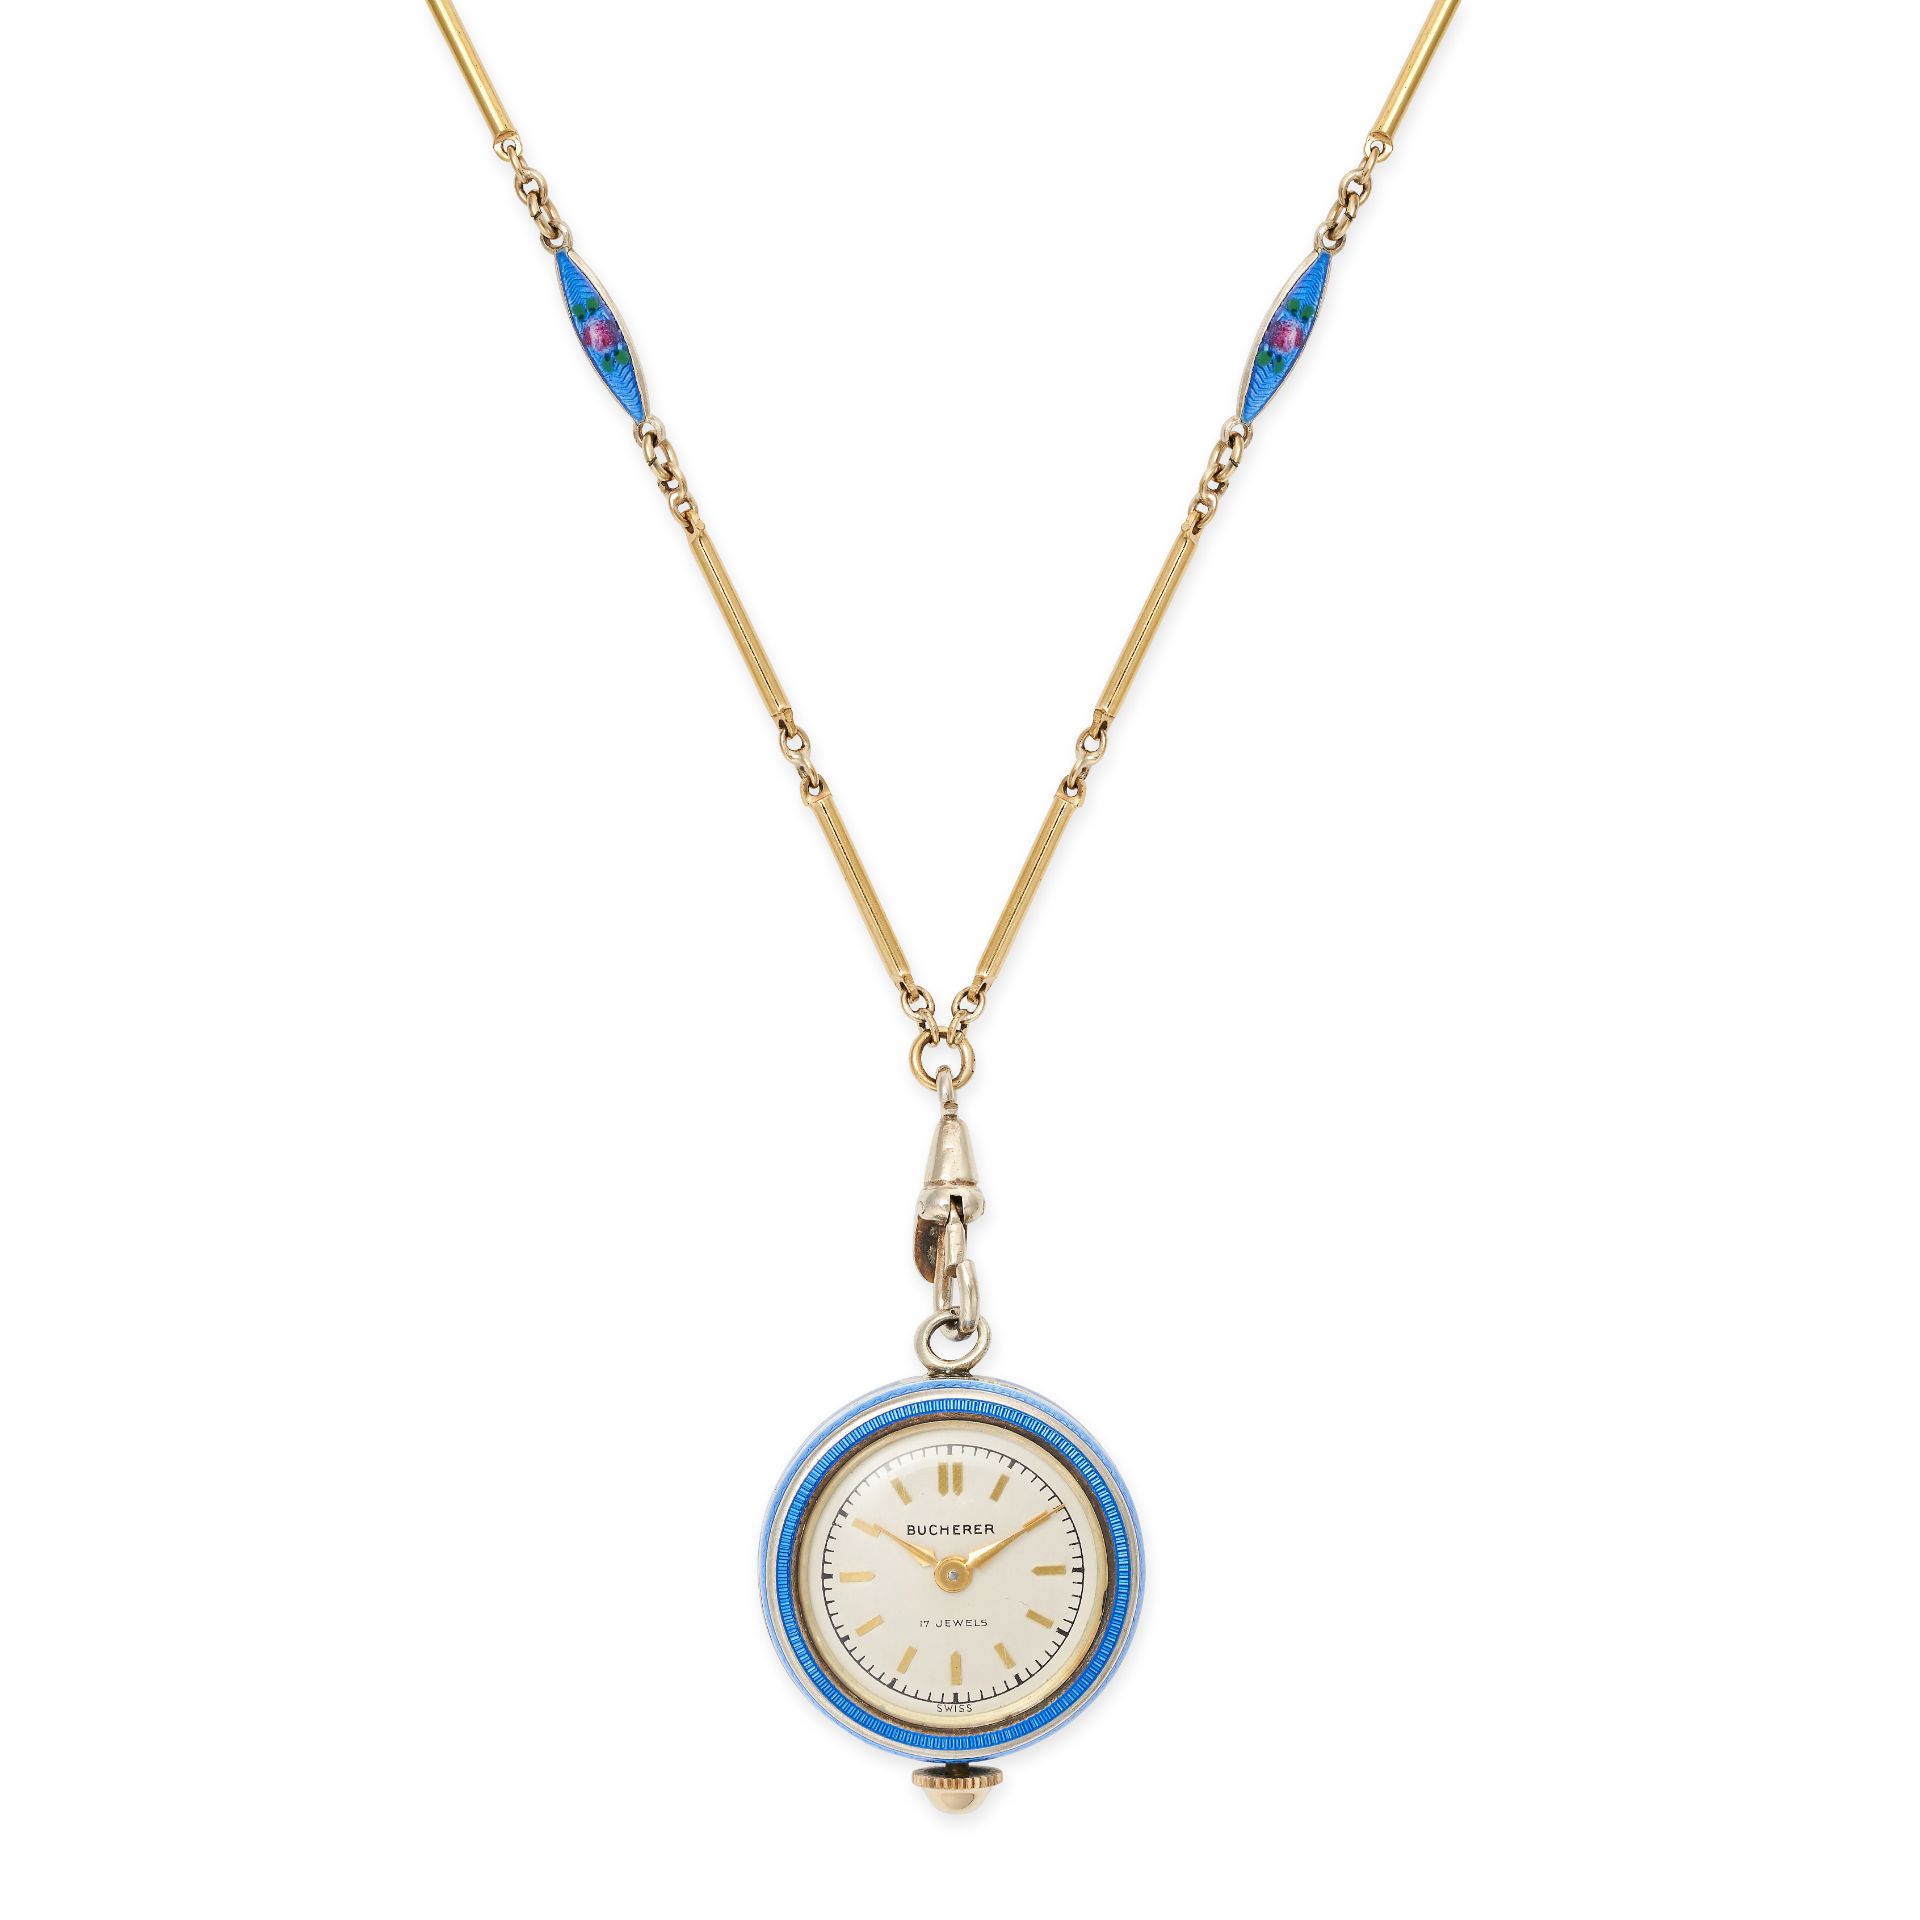 BUCHERER, AN ANTIQUE ENAMEL POCKET WATCH, CHAIN AND BROOCH in gold plated silver, the circular di...